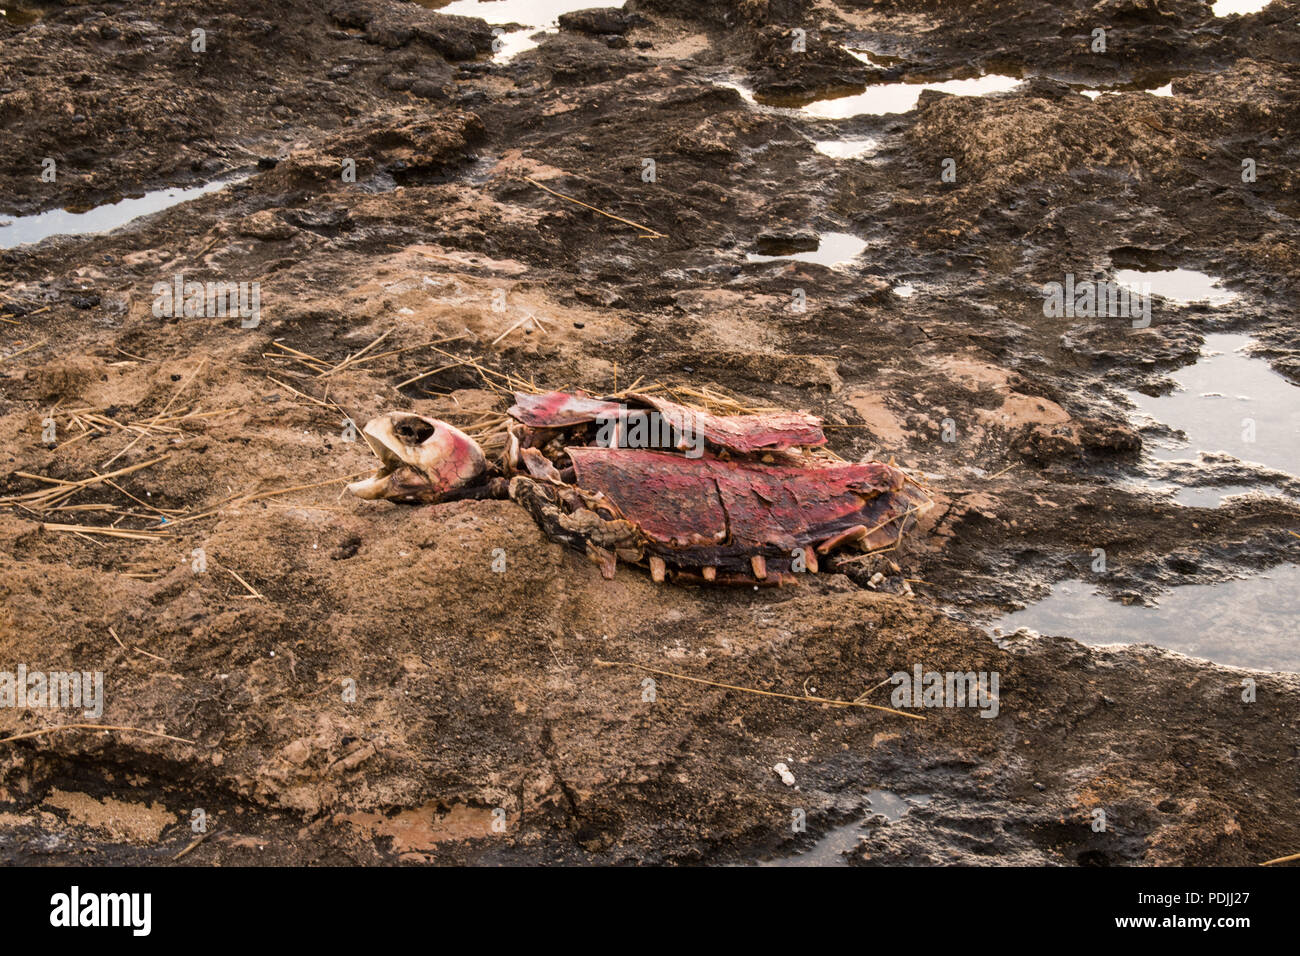 Remains of turtle on beach, Paphos, Cyprus Stock Photo